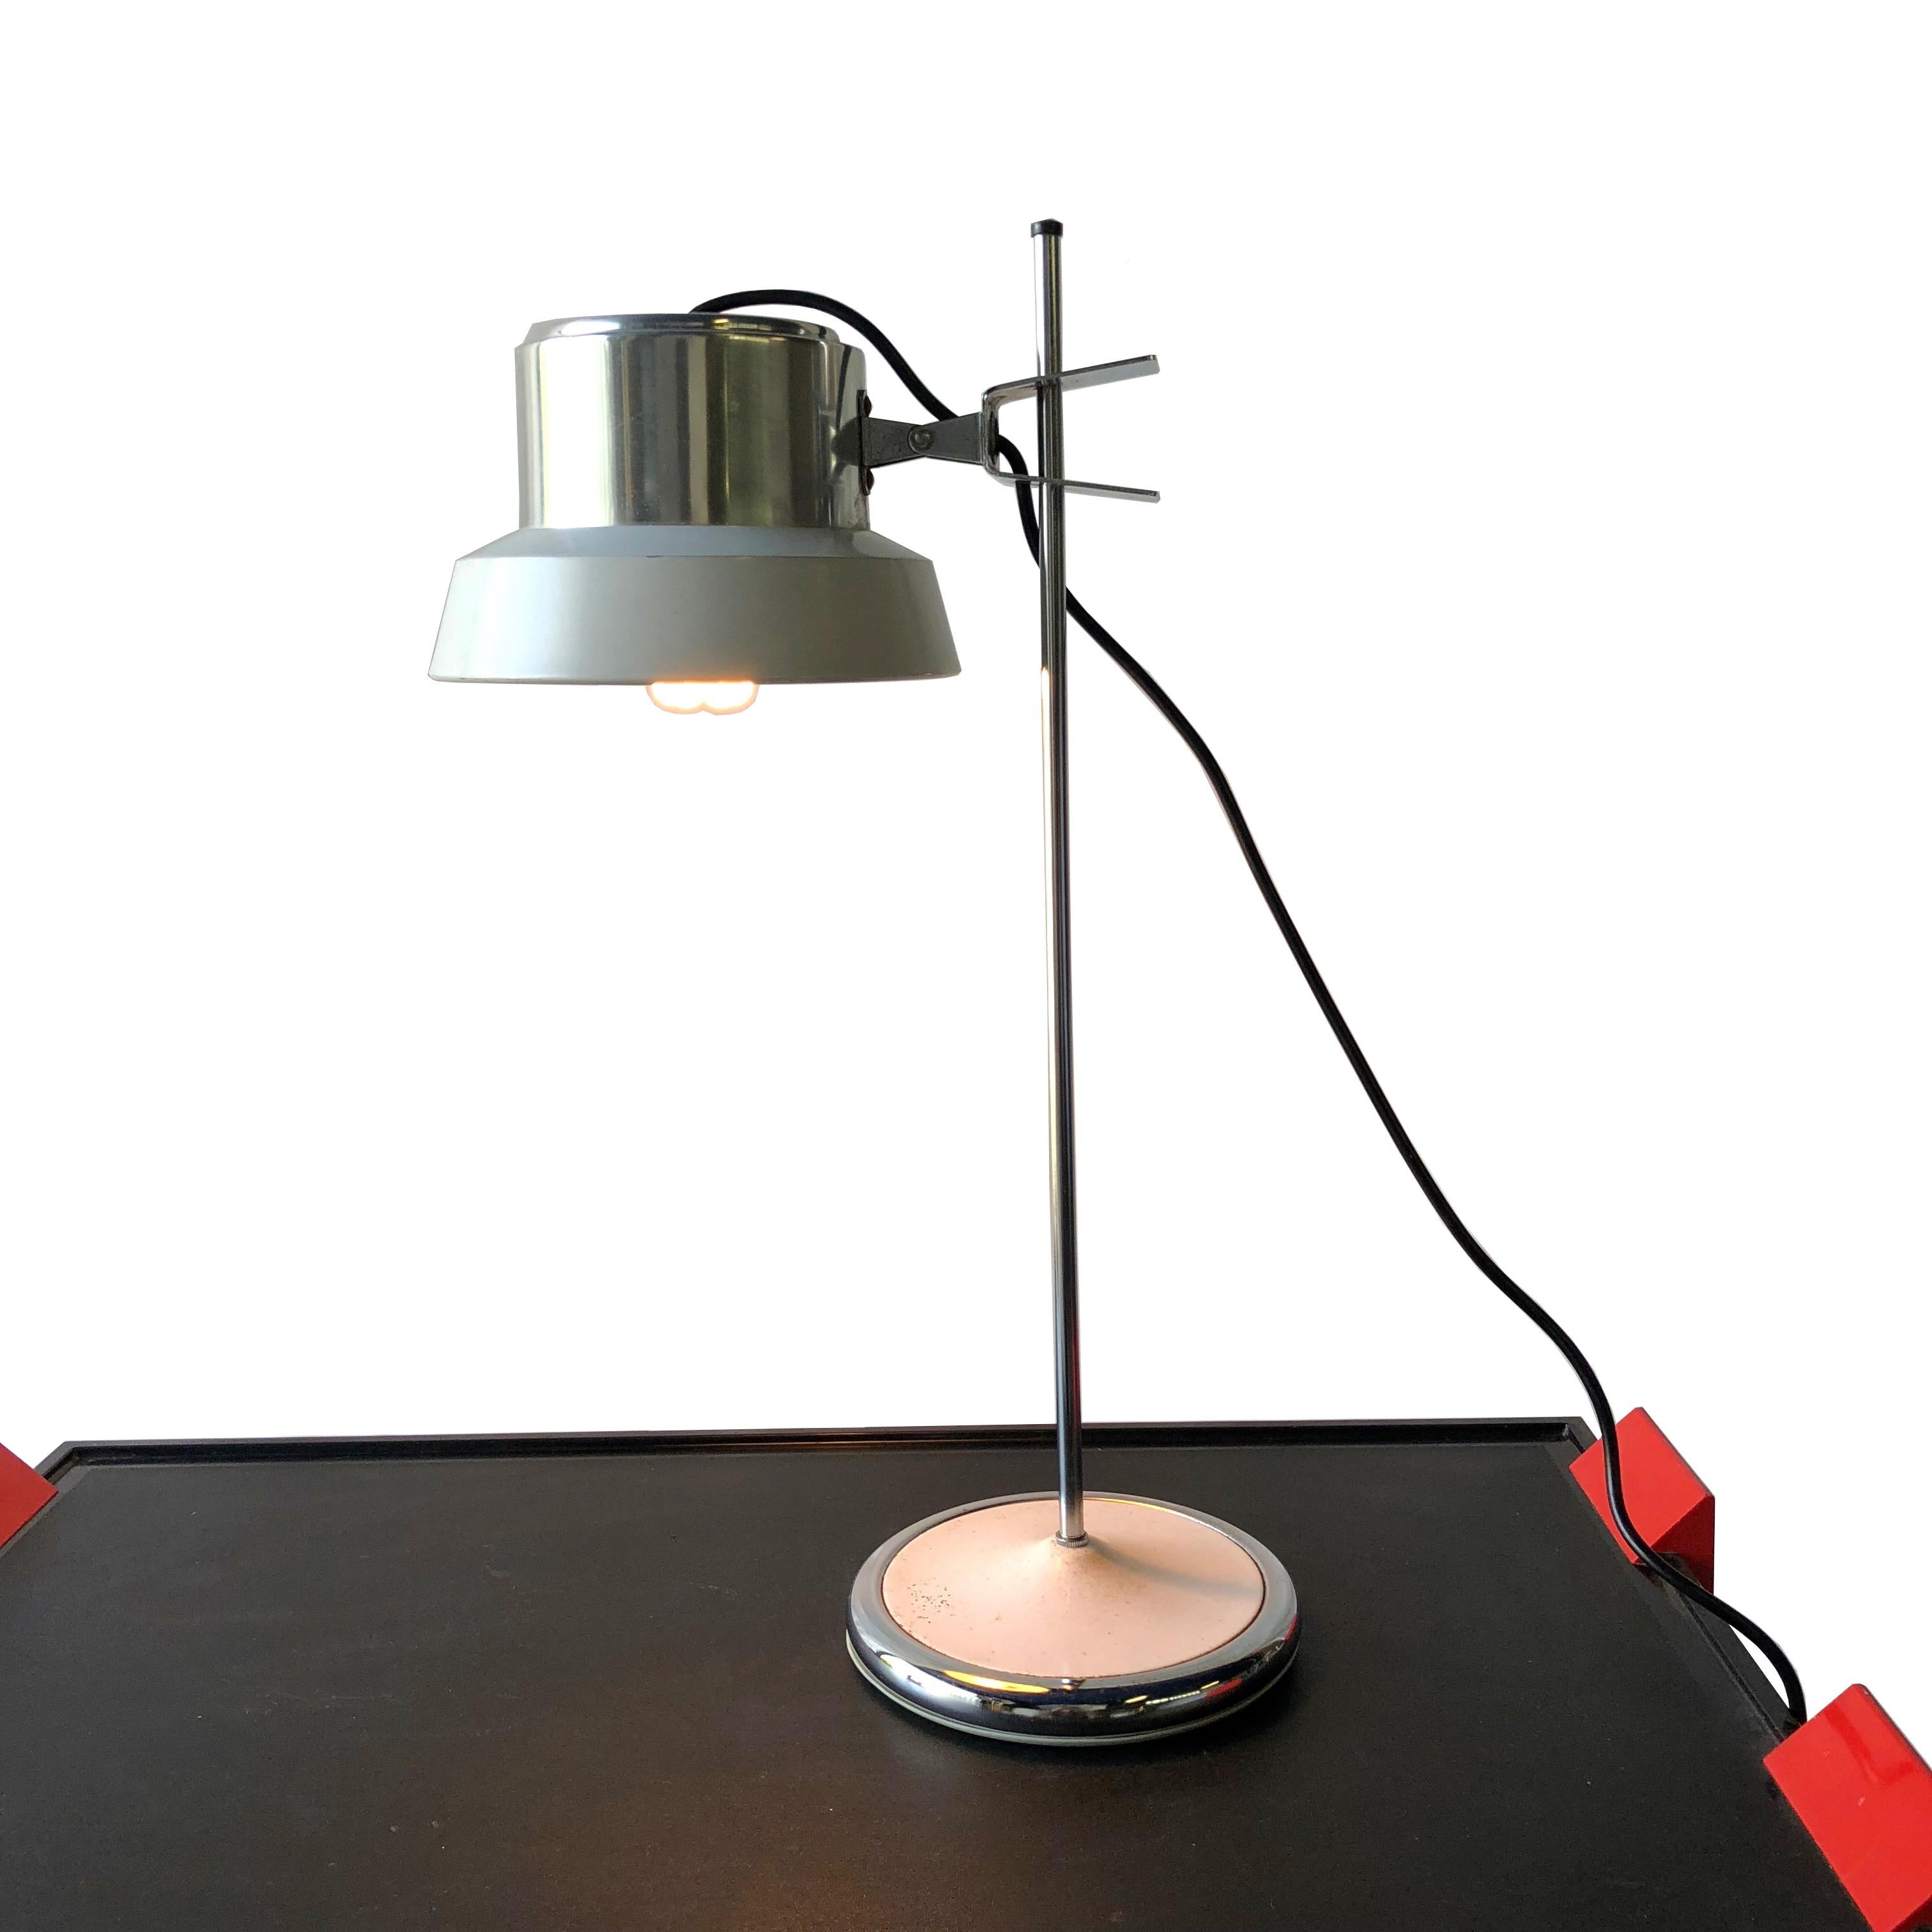 This wonderful Italian design is adjustable in height. It features a chromed metal body and a small brushed shade. It adapts perfectly to a modern, Industrial or Minimalist design house. The lamp is signed Targetti Sankey.